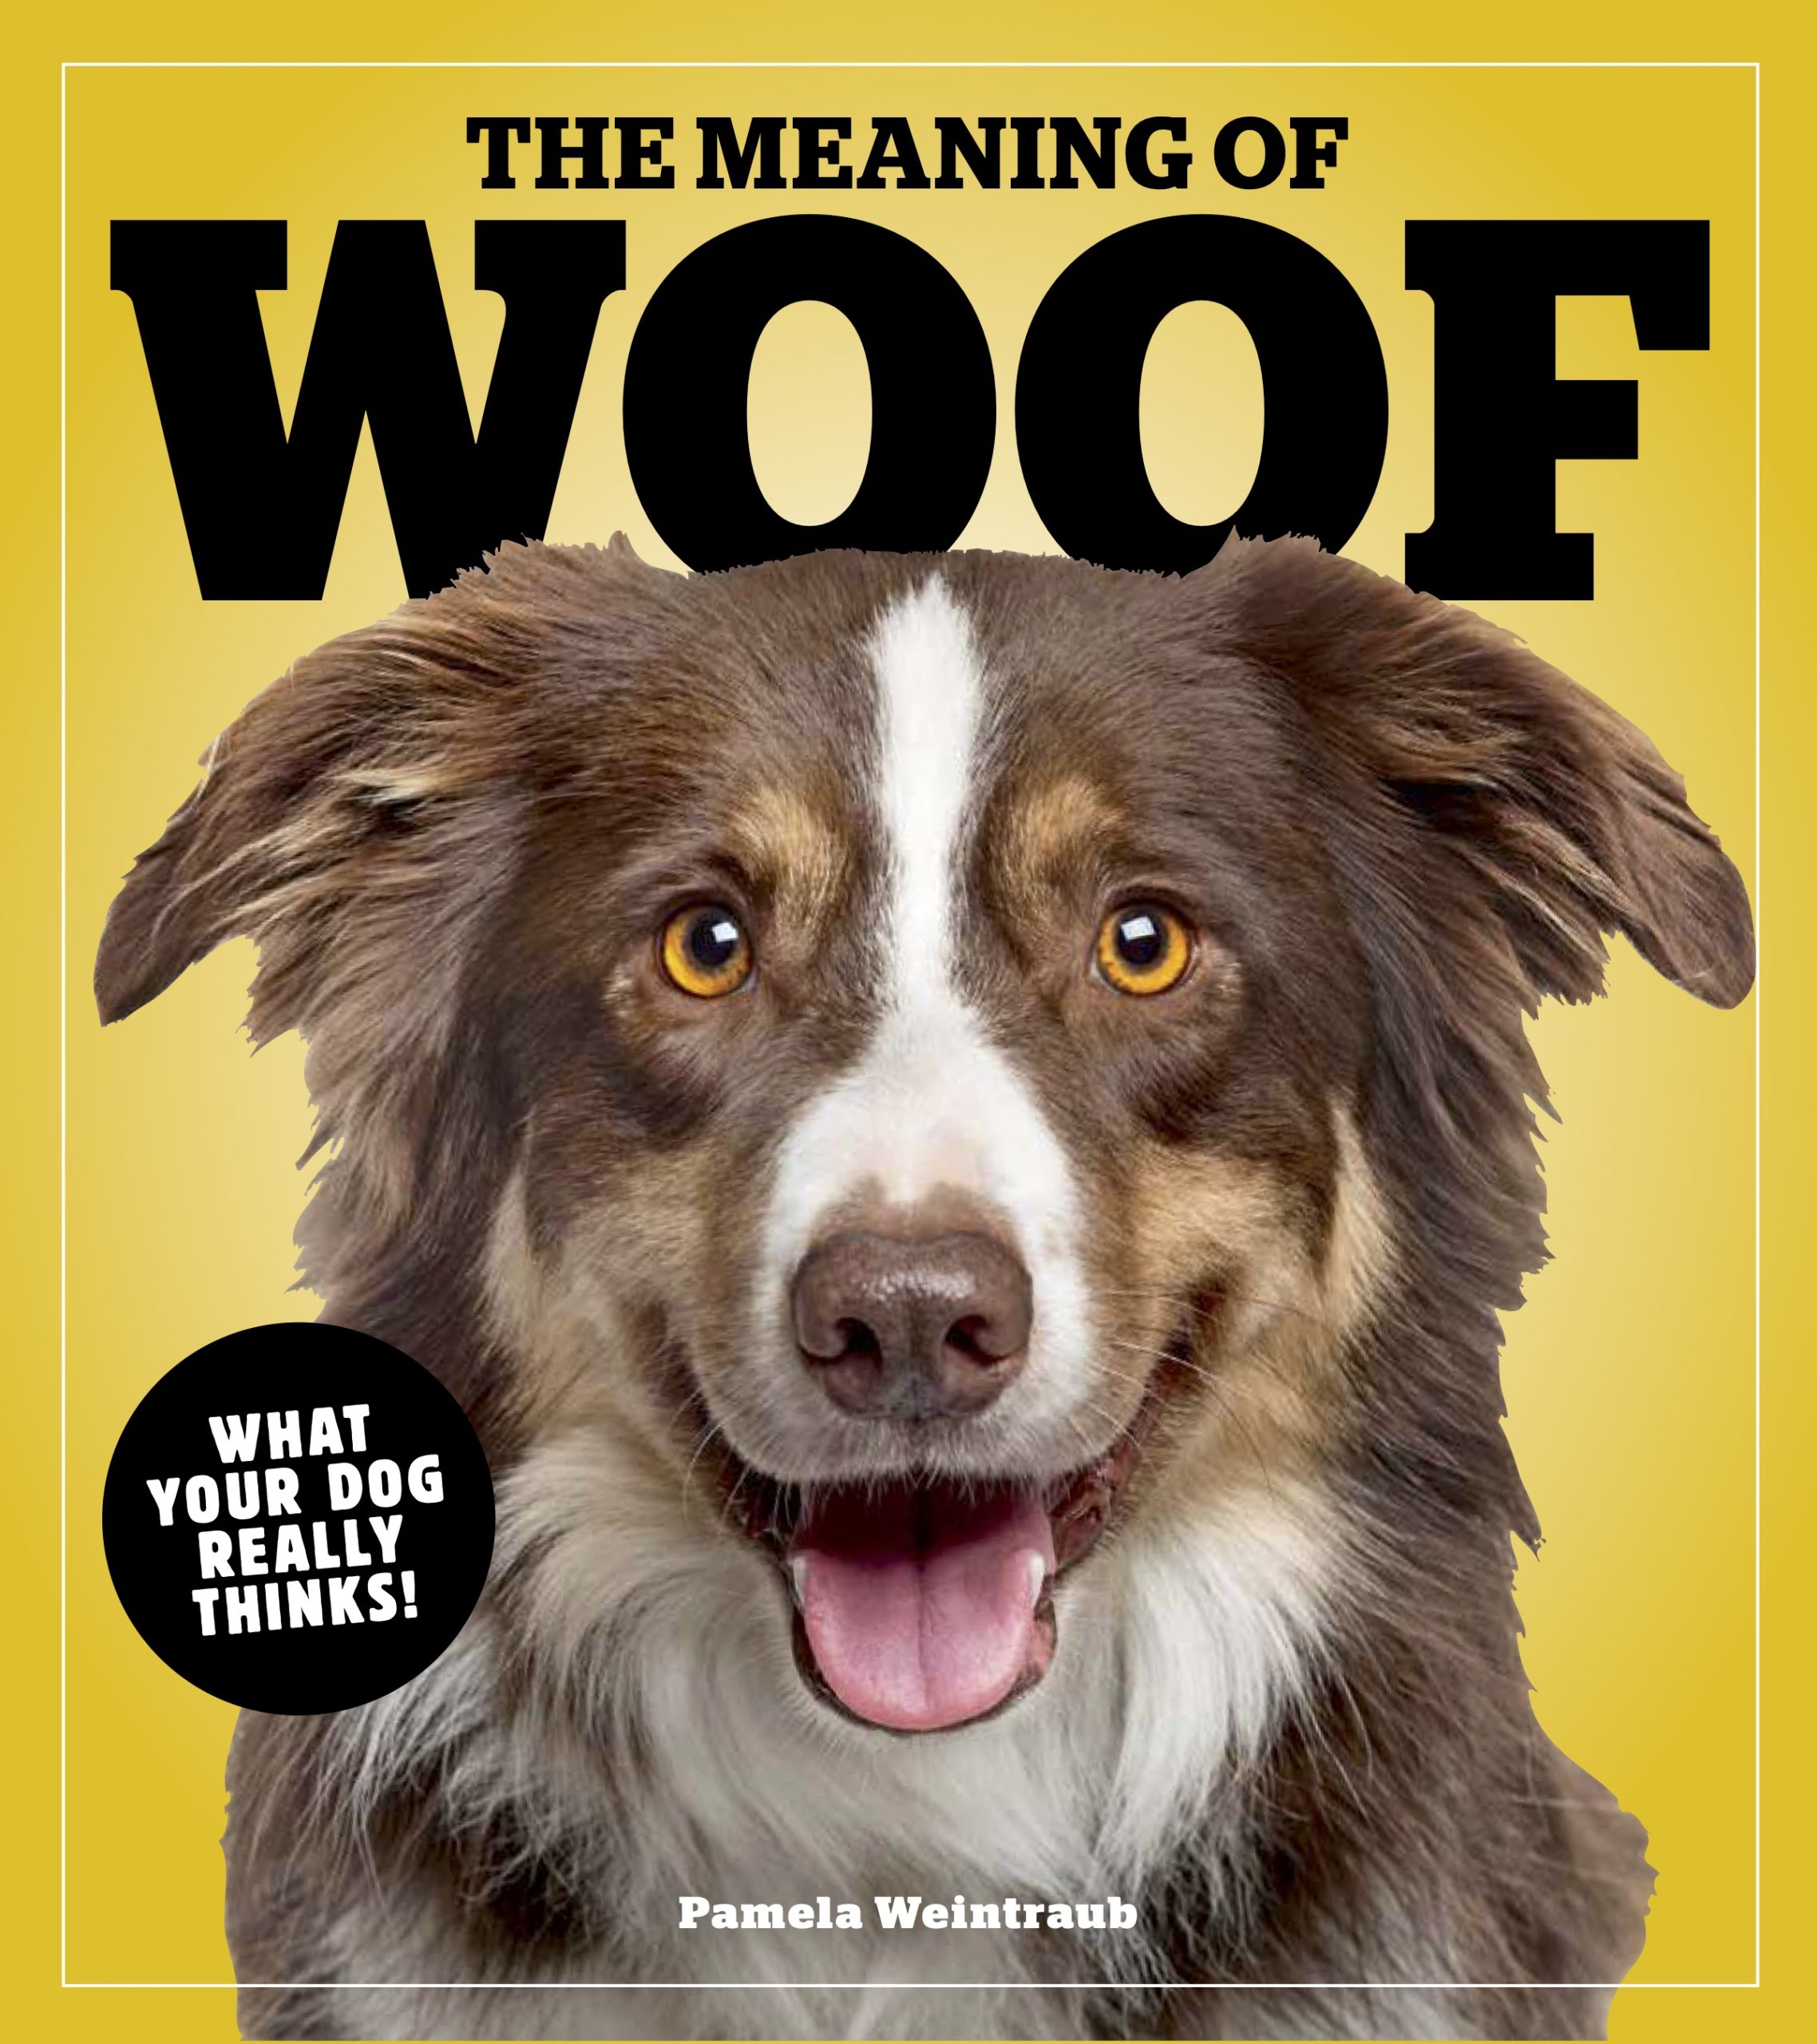 DOGS_Book_Cover_5B_WOOF_REV_10-31